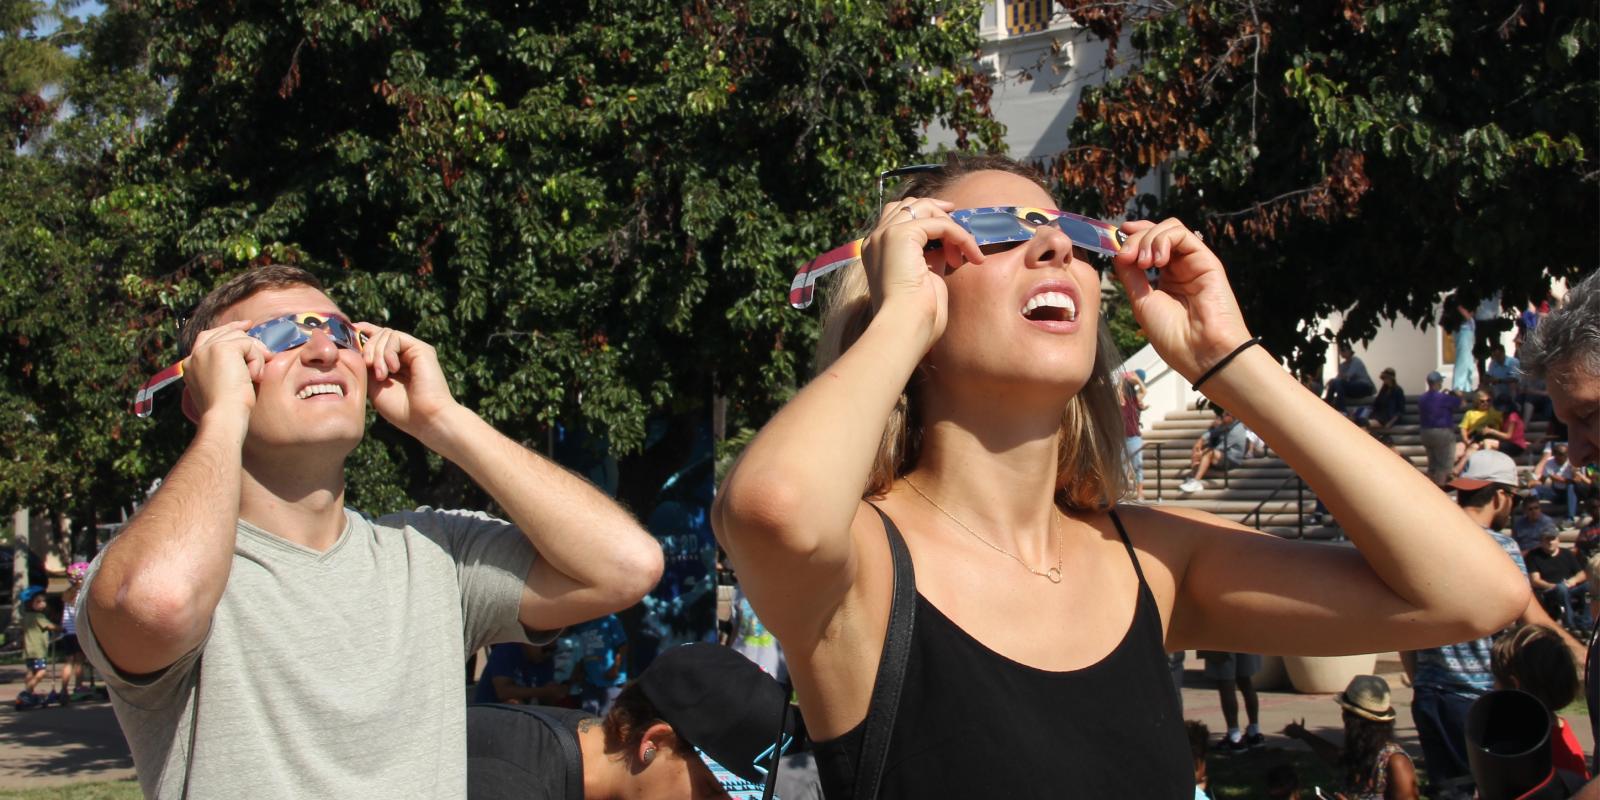 A man and a woman wearing eclipse sunglasses squinting up at an eclipse in a green outdoor area